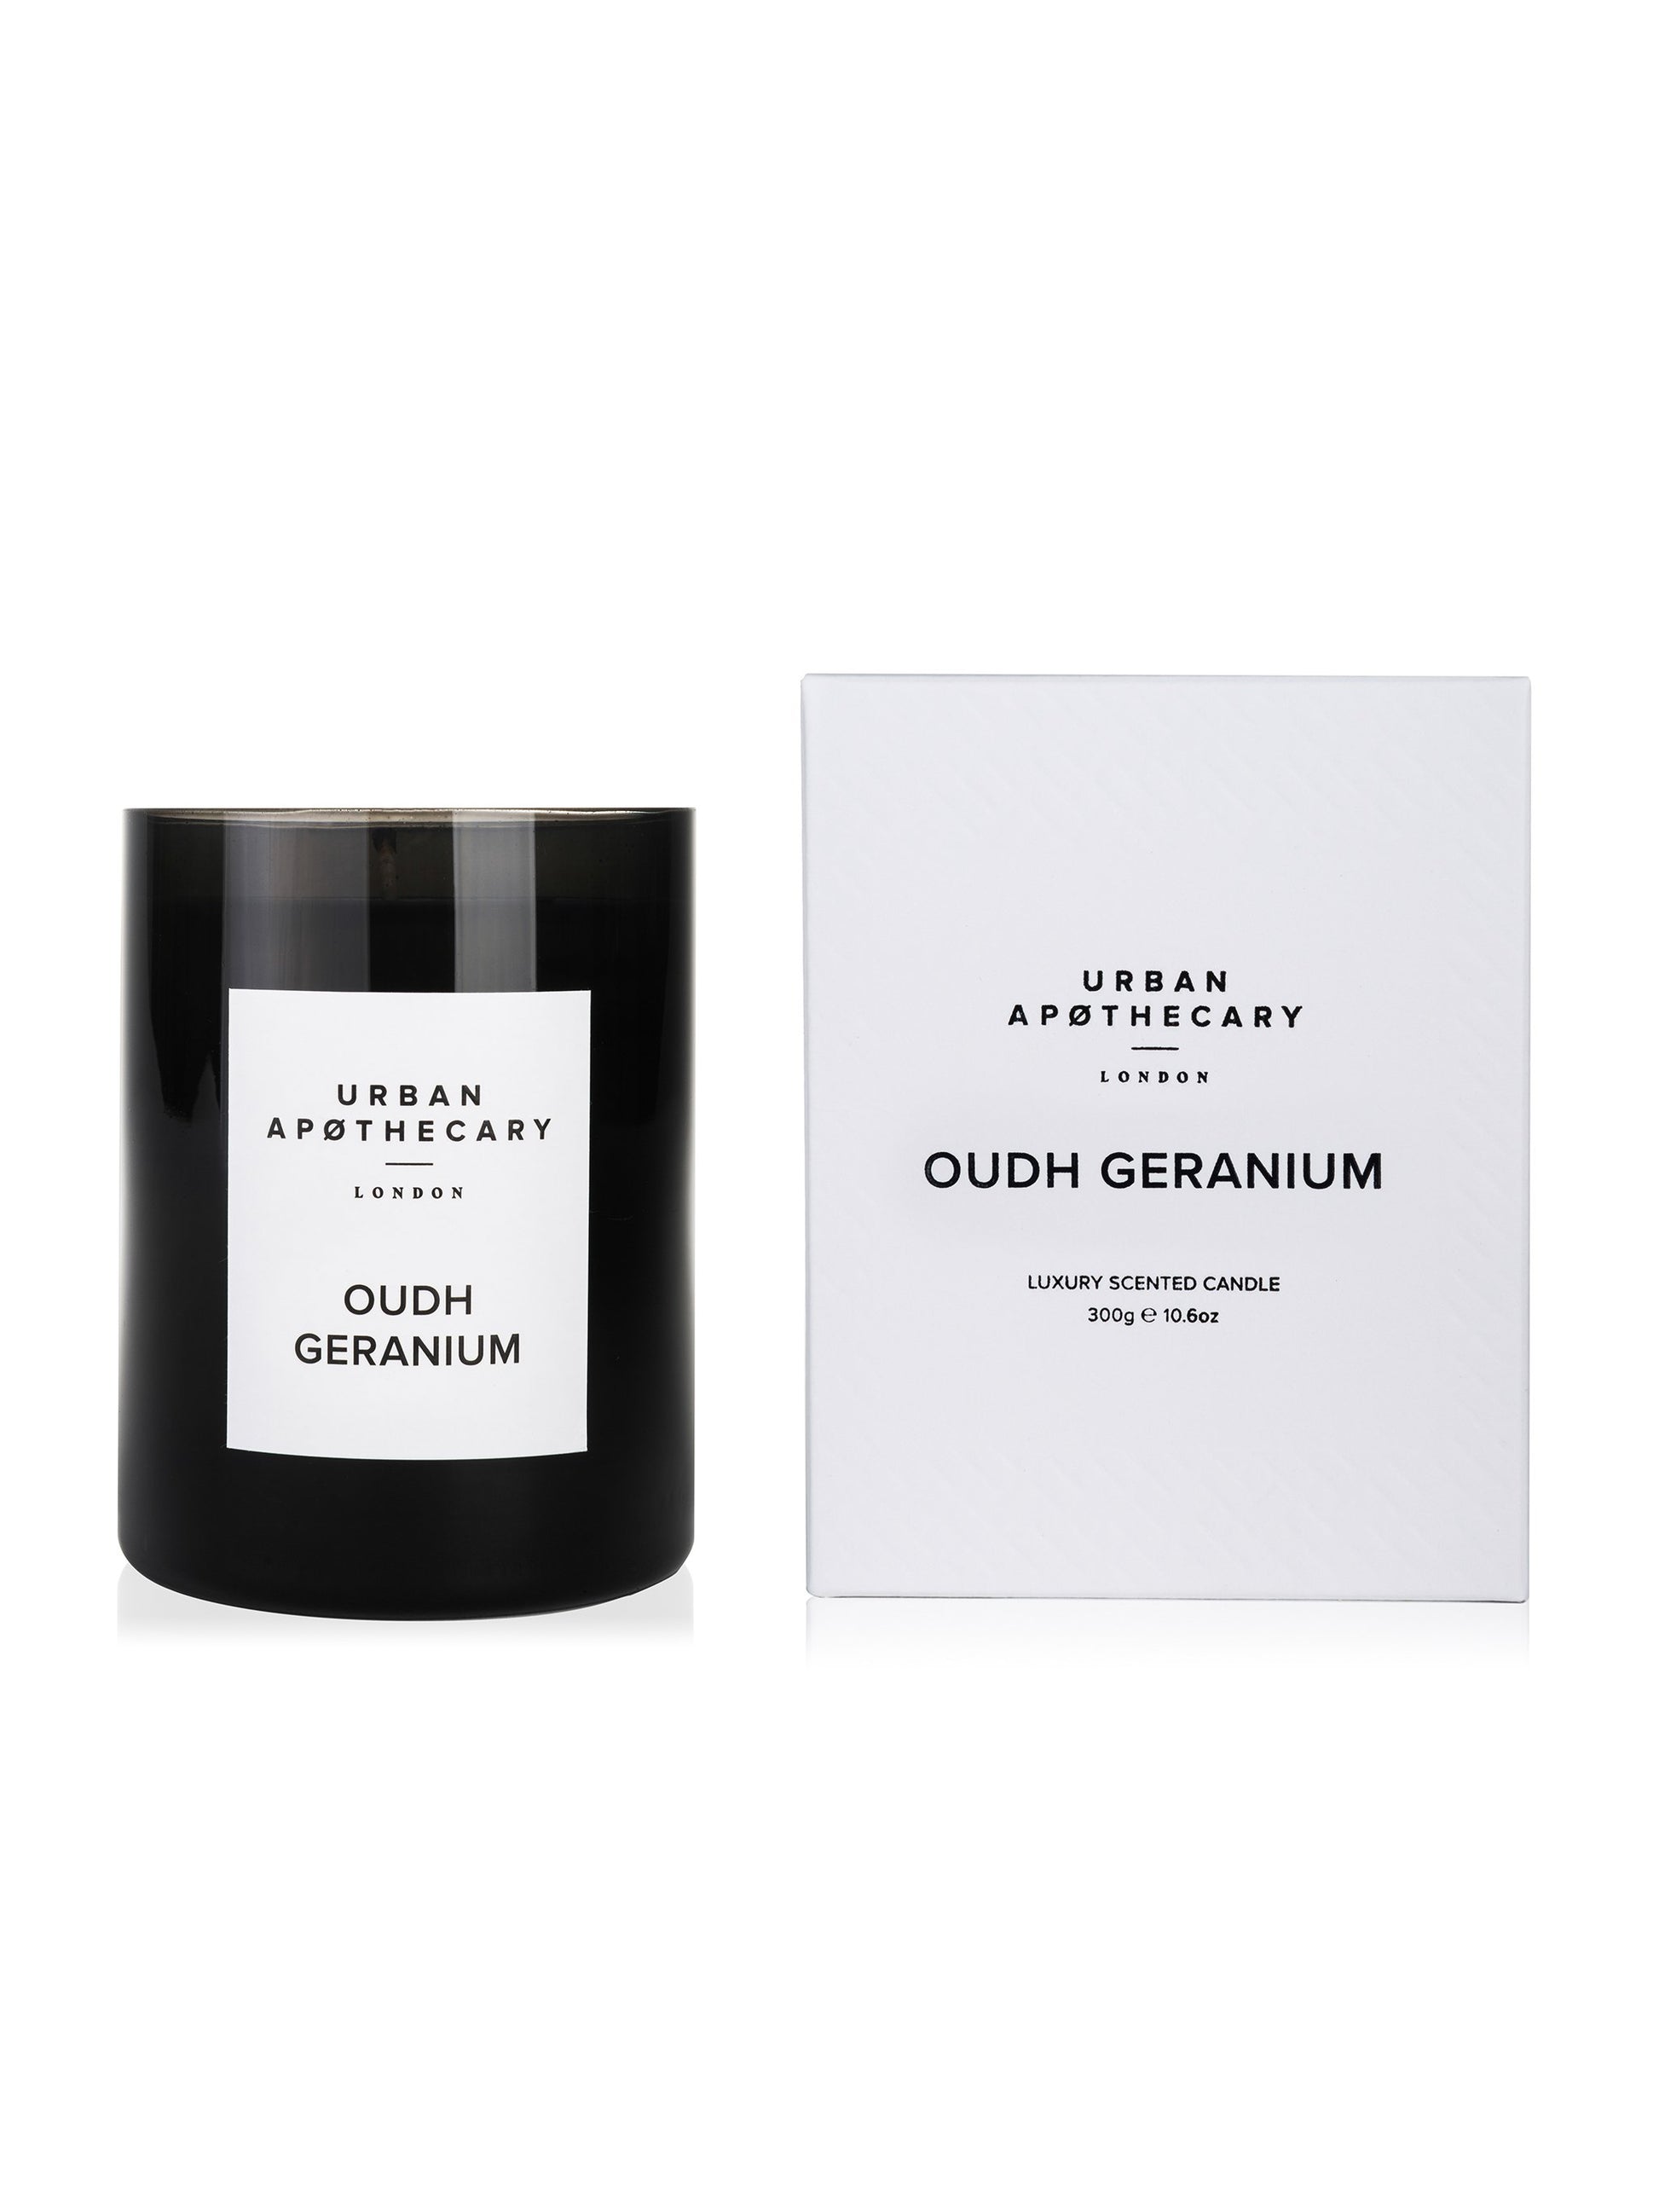 Urban Apothecary London Luxury Oud Geranium Scented Candle Weston Table